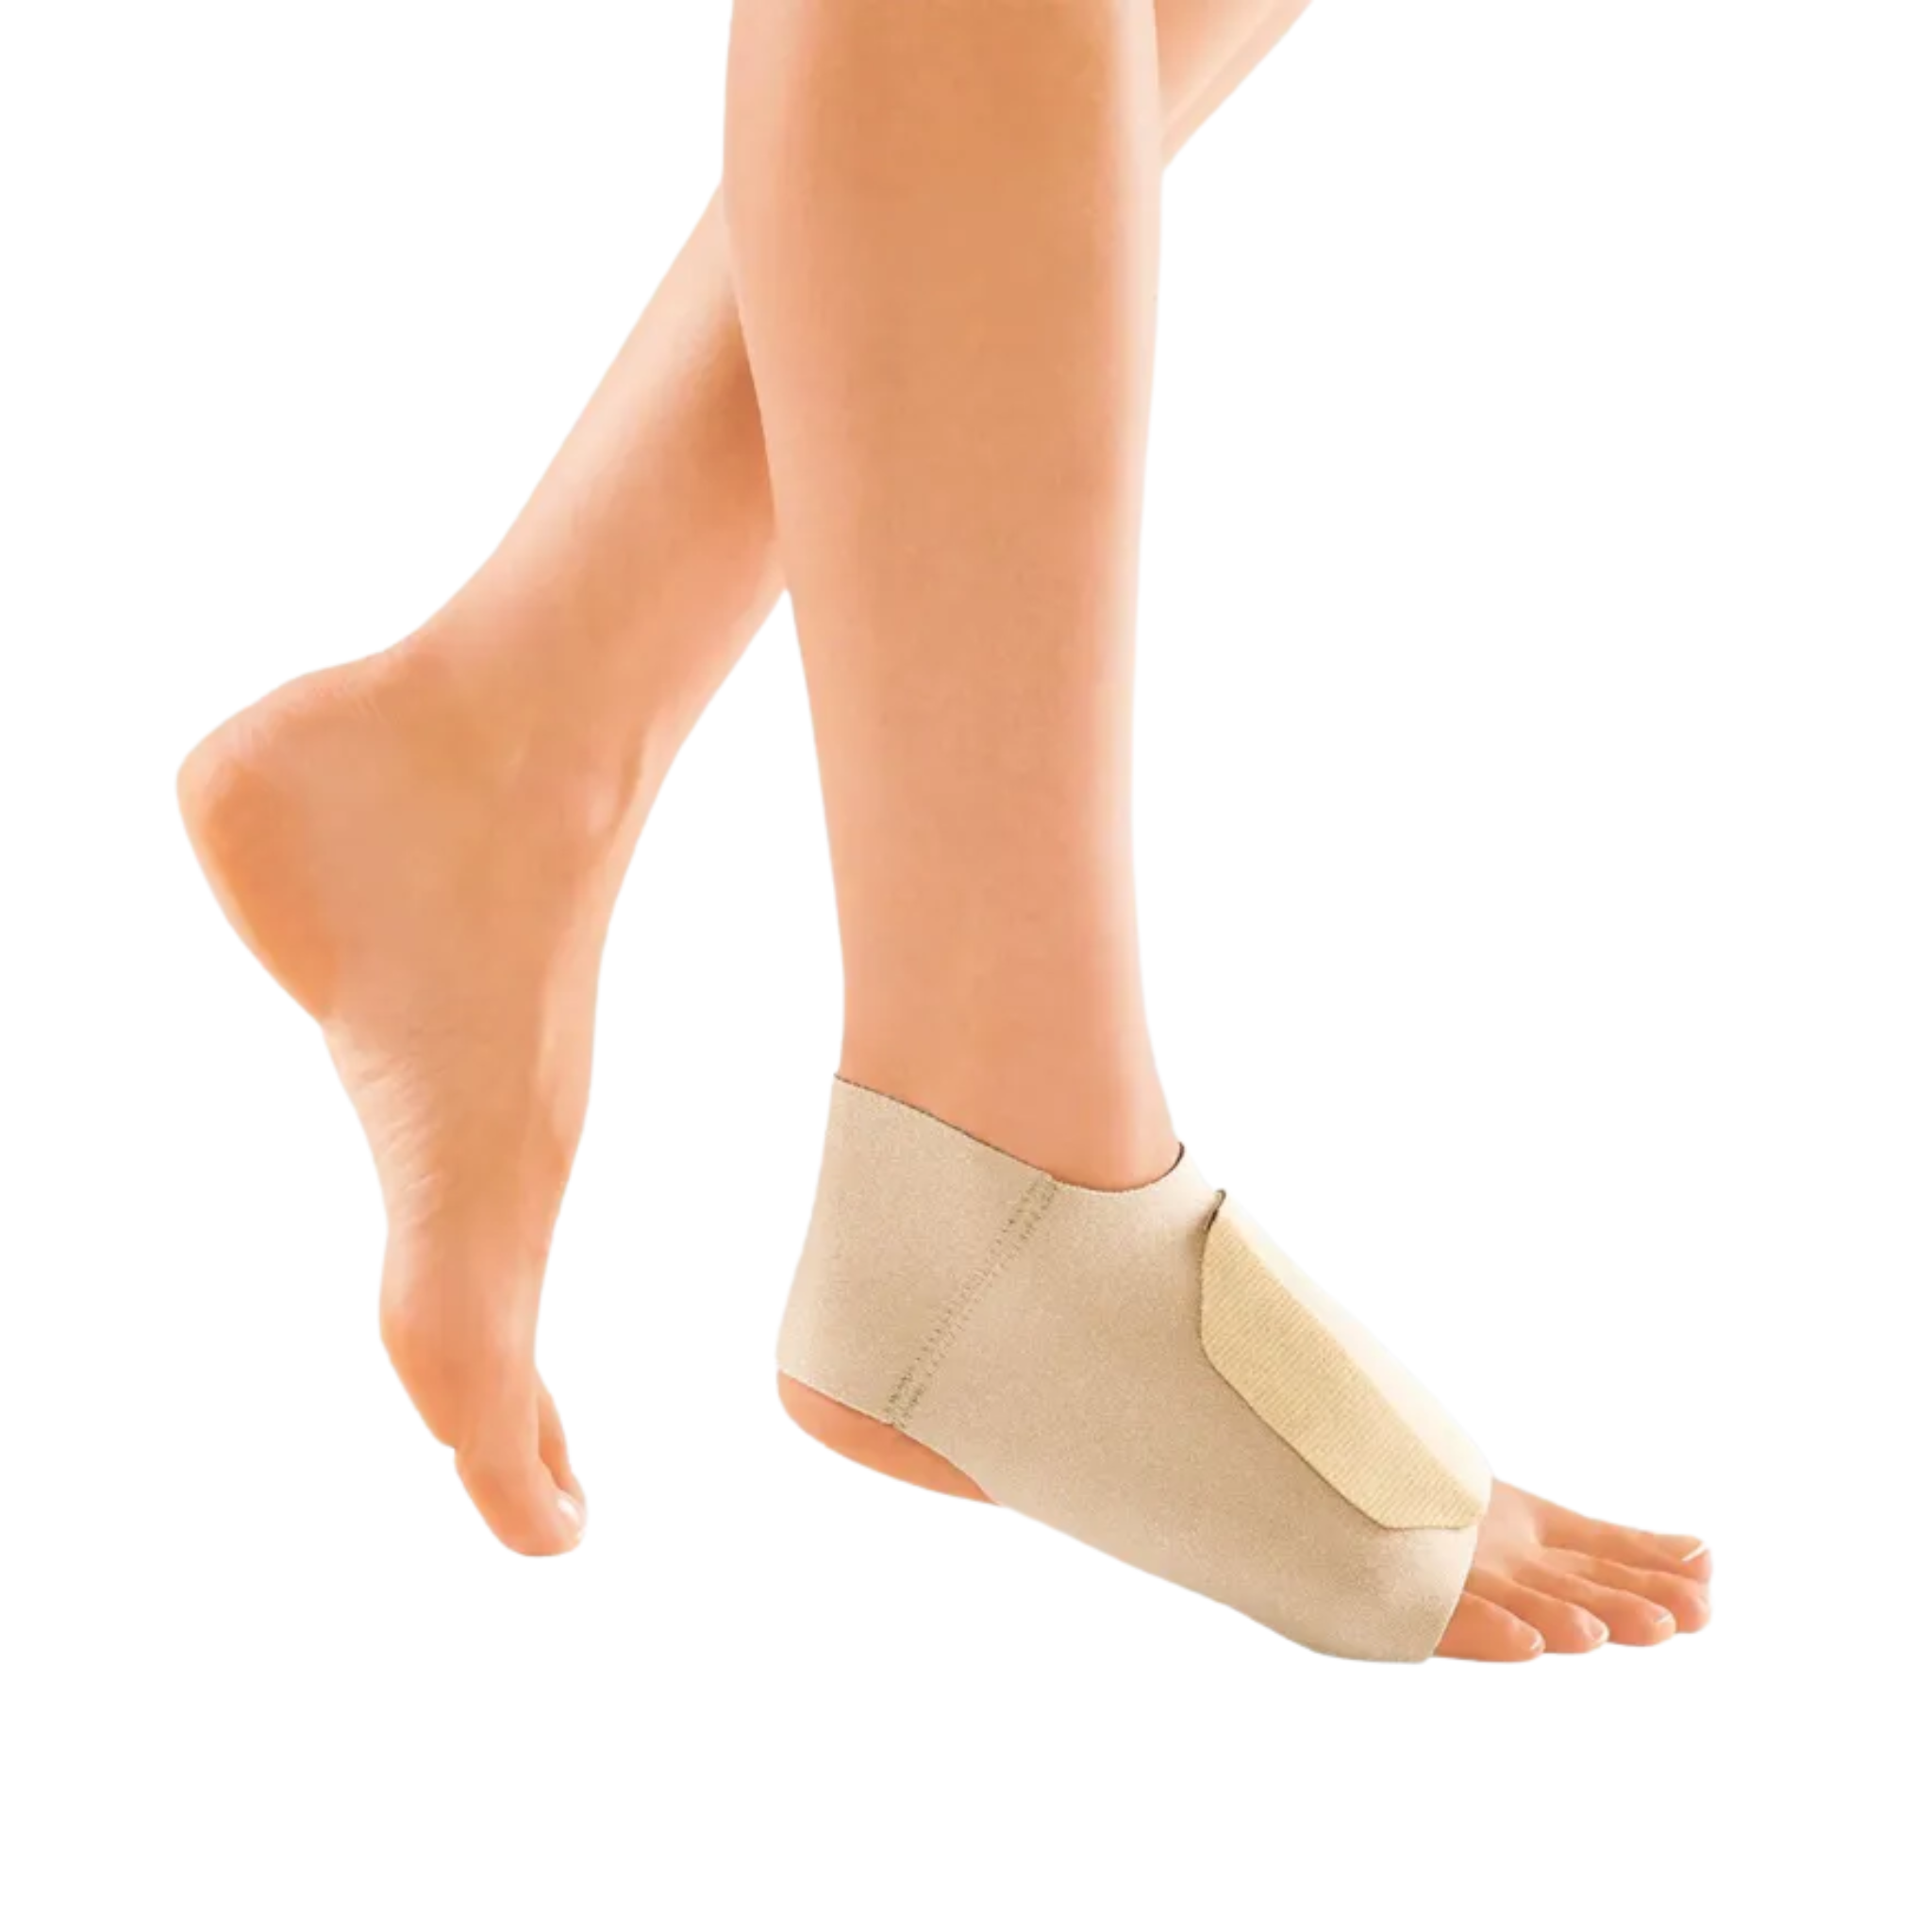 Power Added Compression Band | PAC Band | circaid